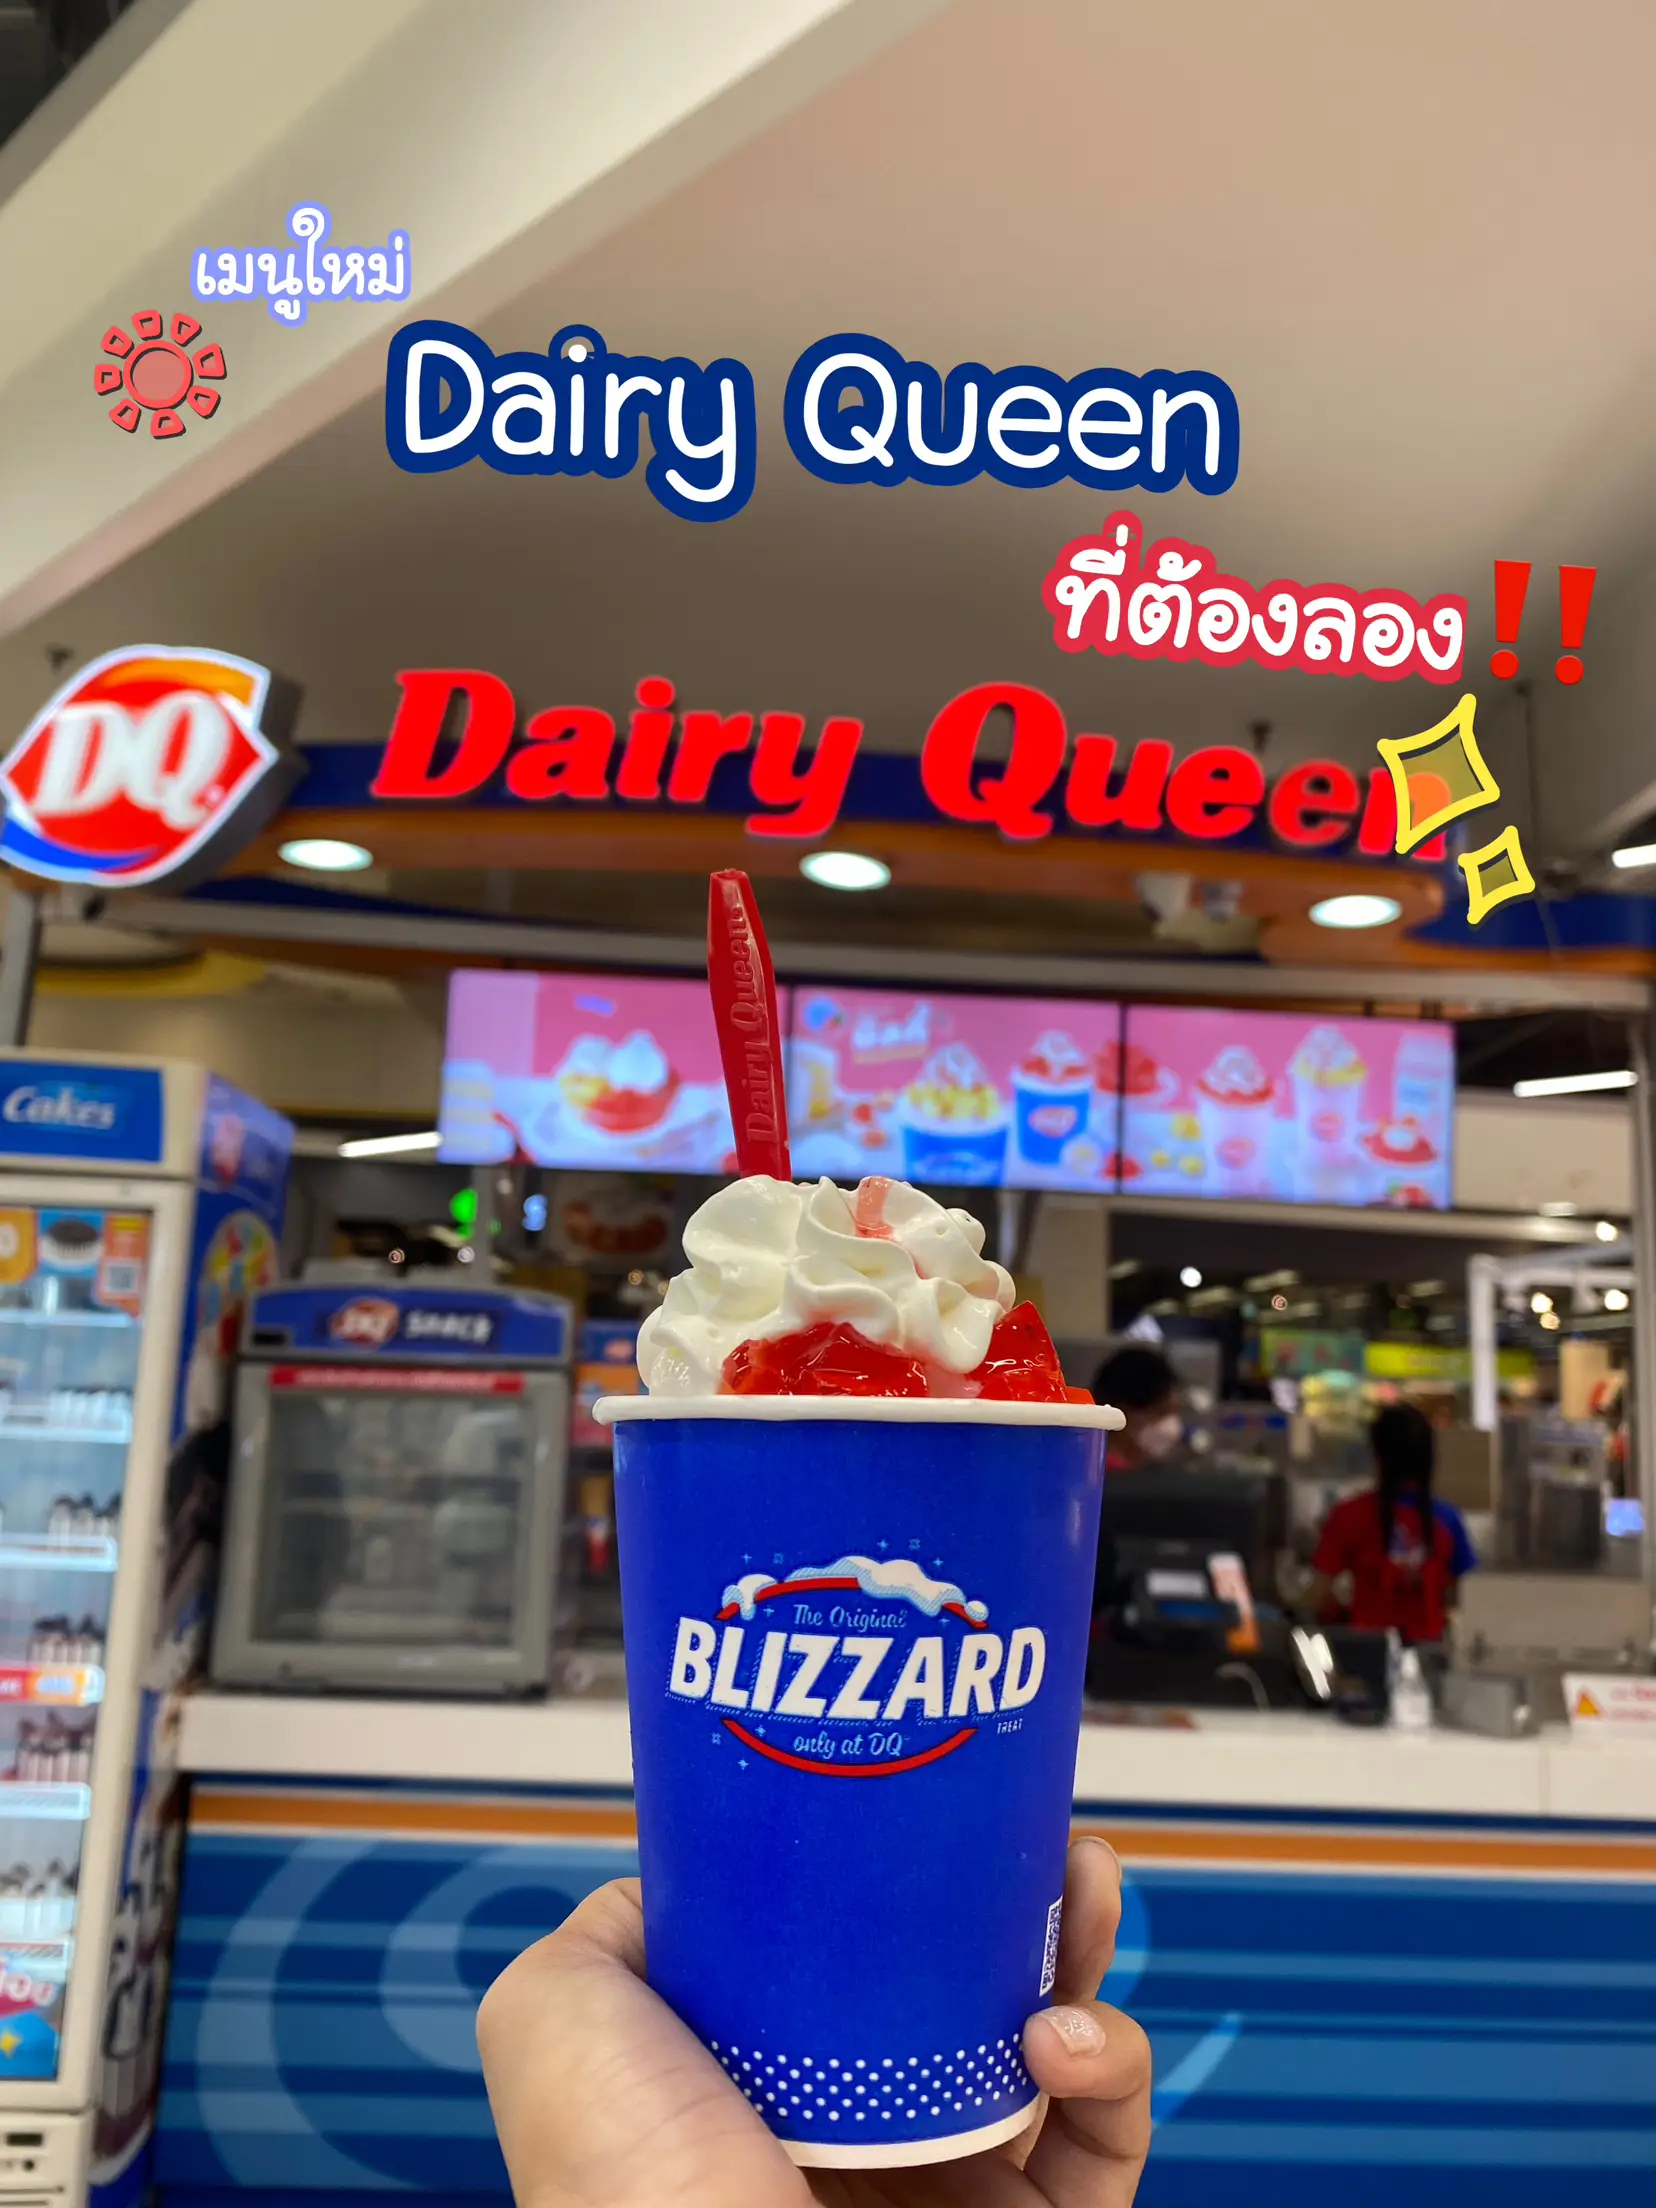 New Dairy Queen menu needs to try‼️ | Gallery posted by Maykan_13 